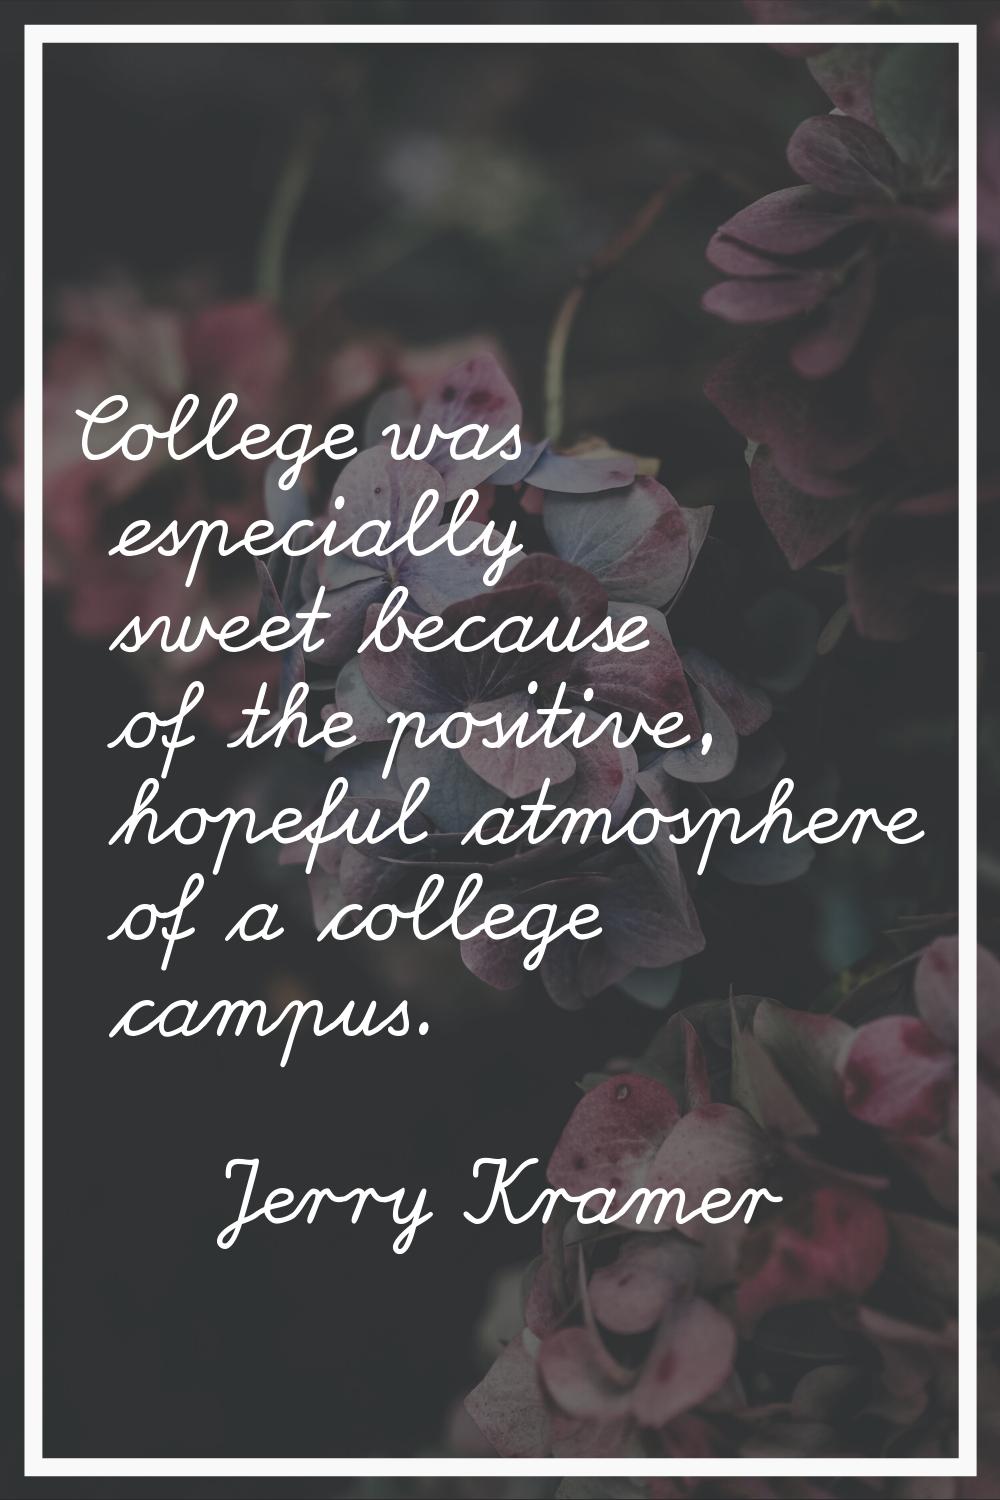 College was especially sweet because of the positive, hopeful atmosphere of a college campus.